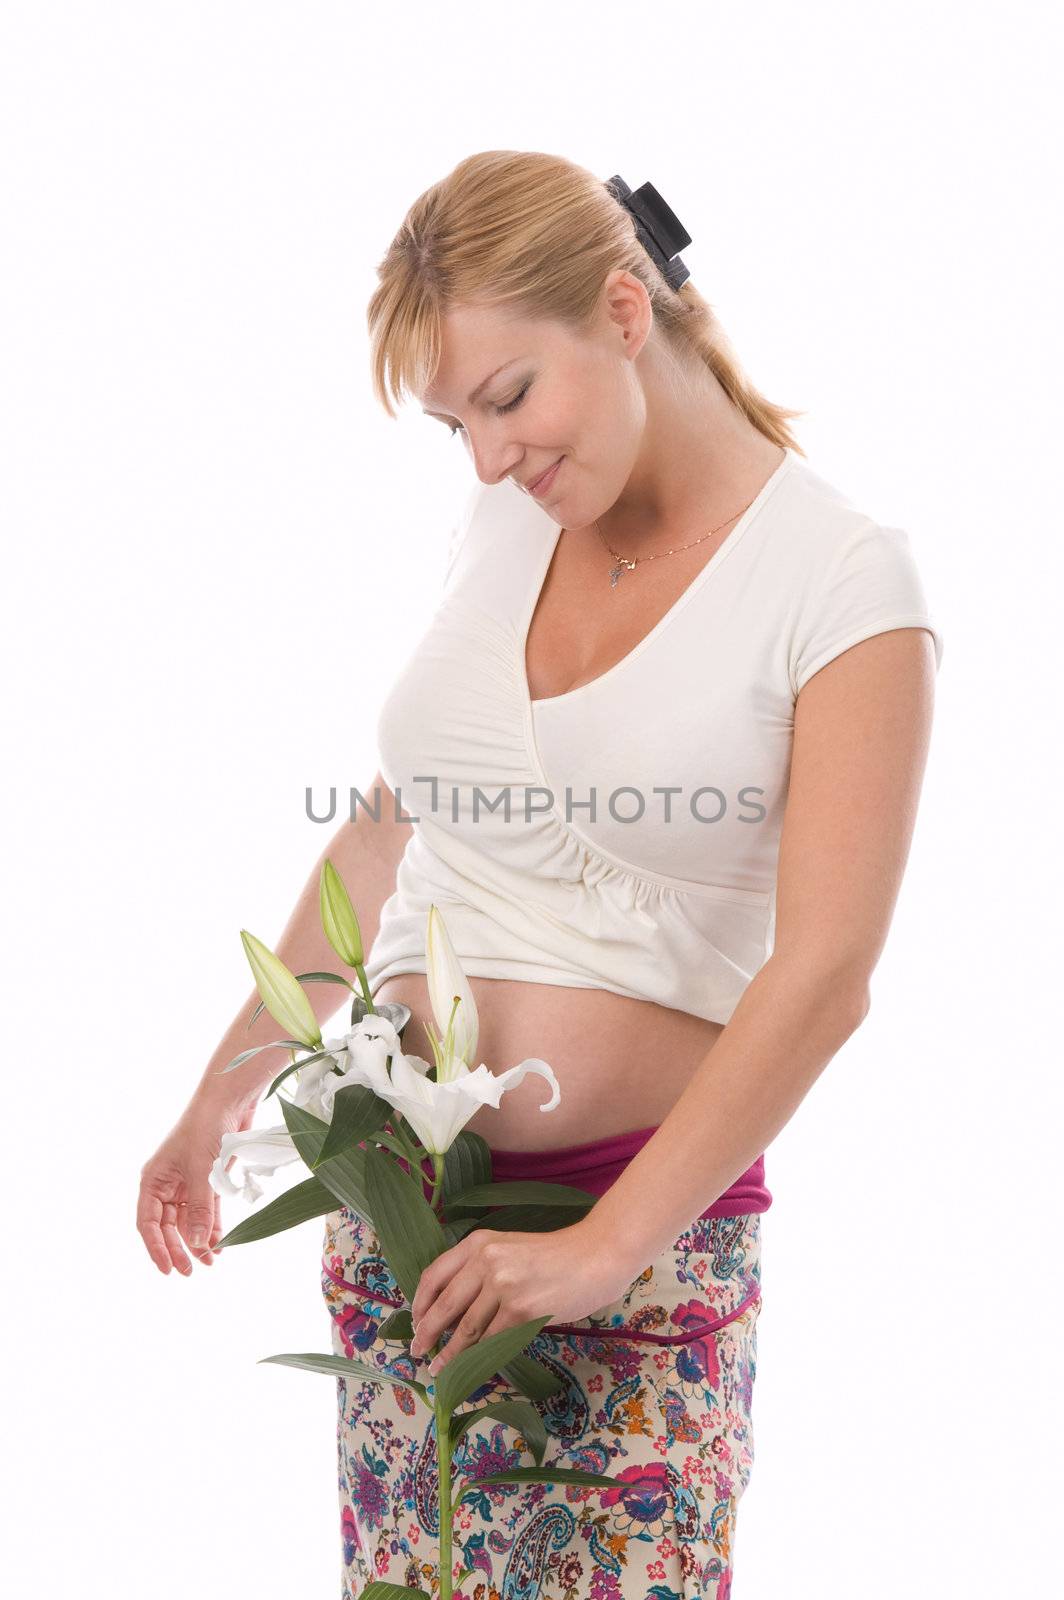 The attractive pregnant woman holds a liliy in hands